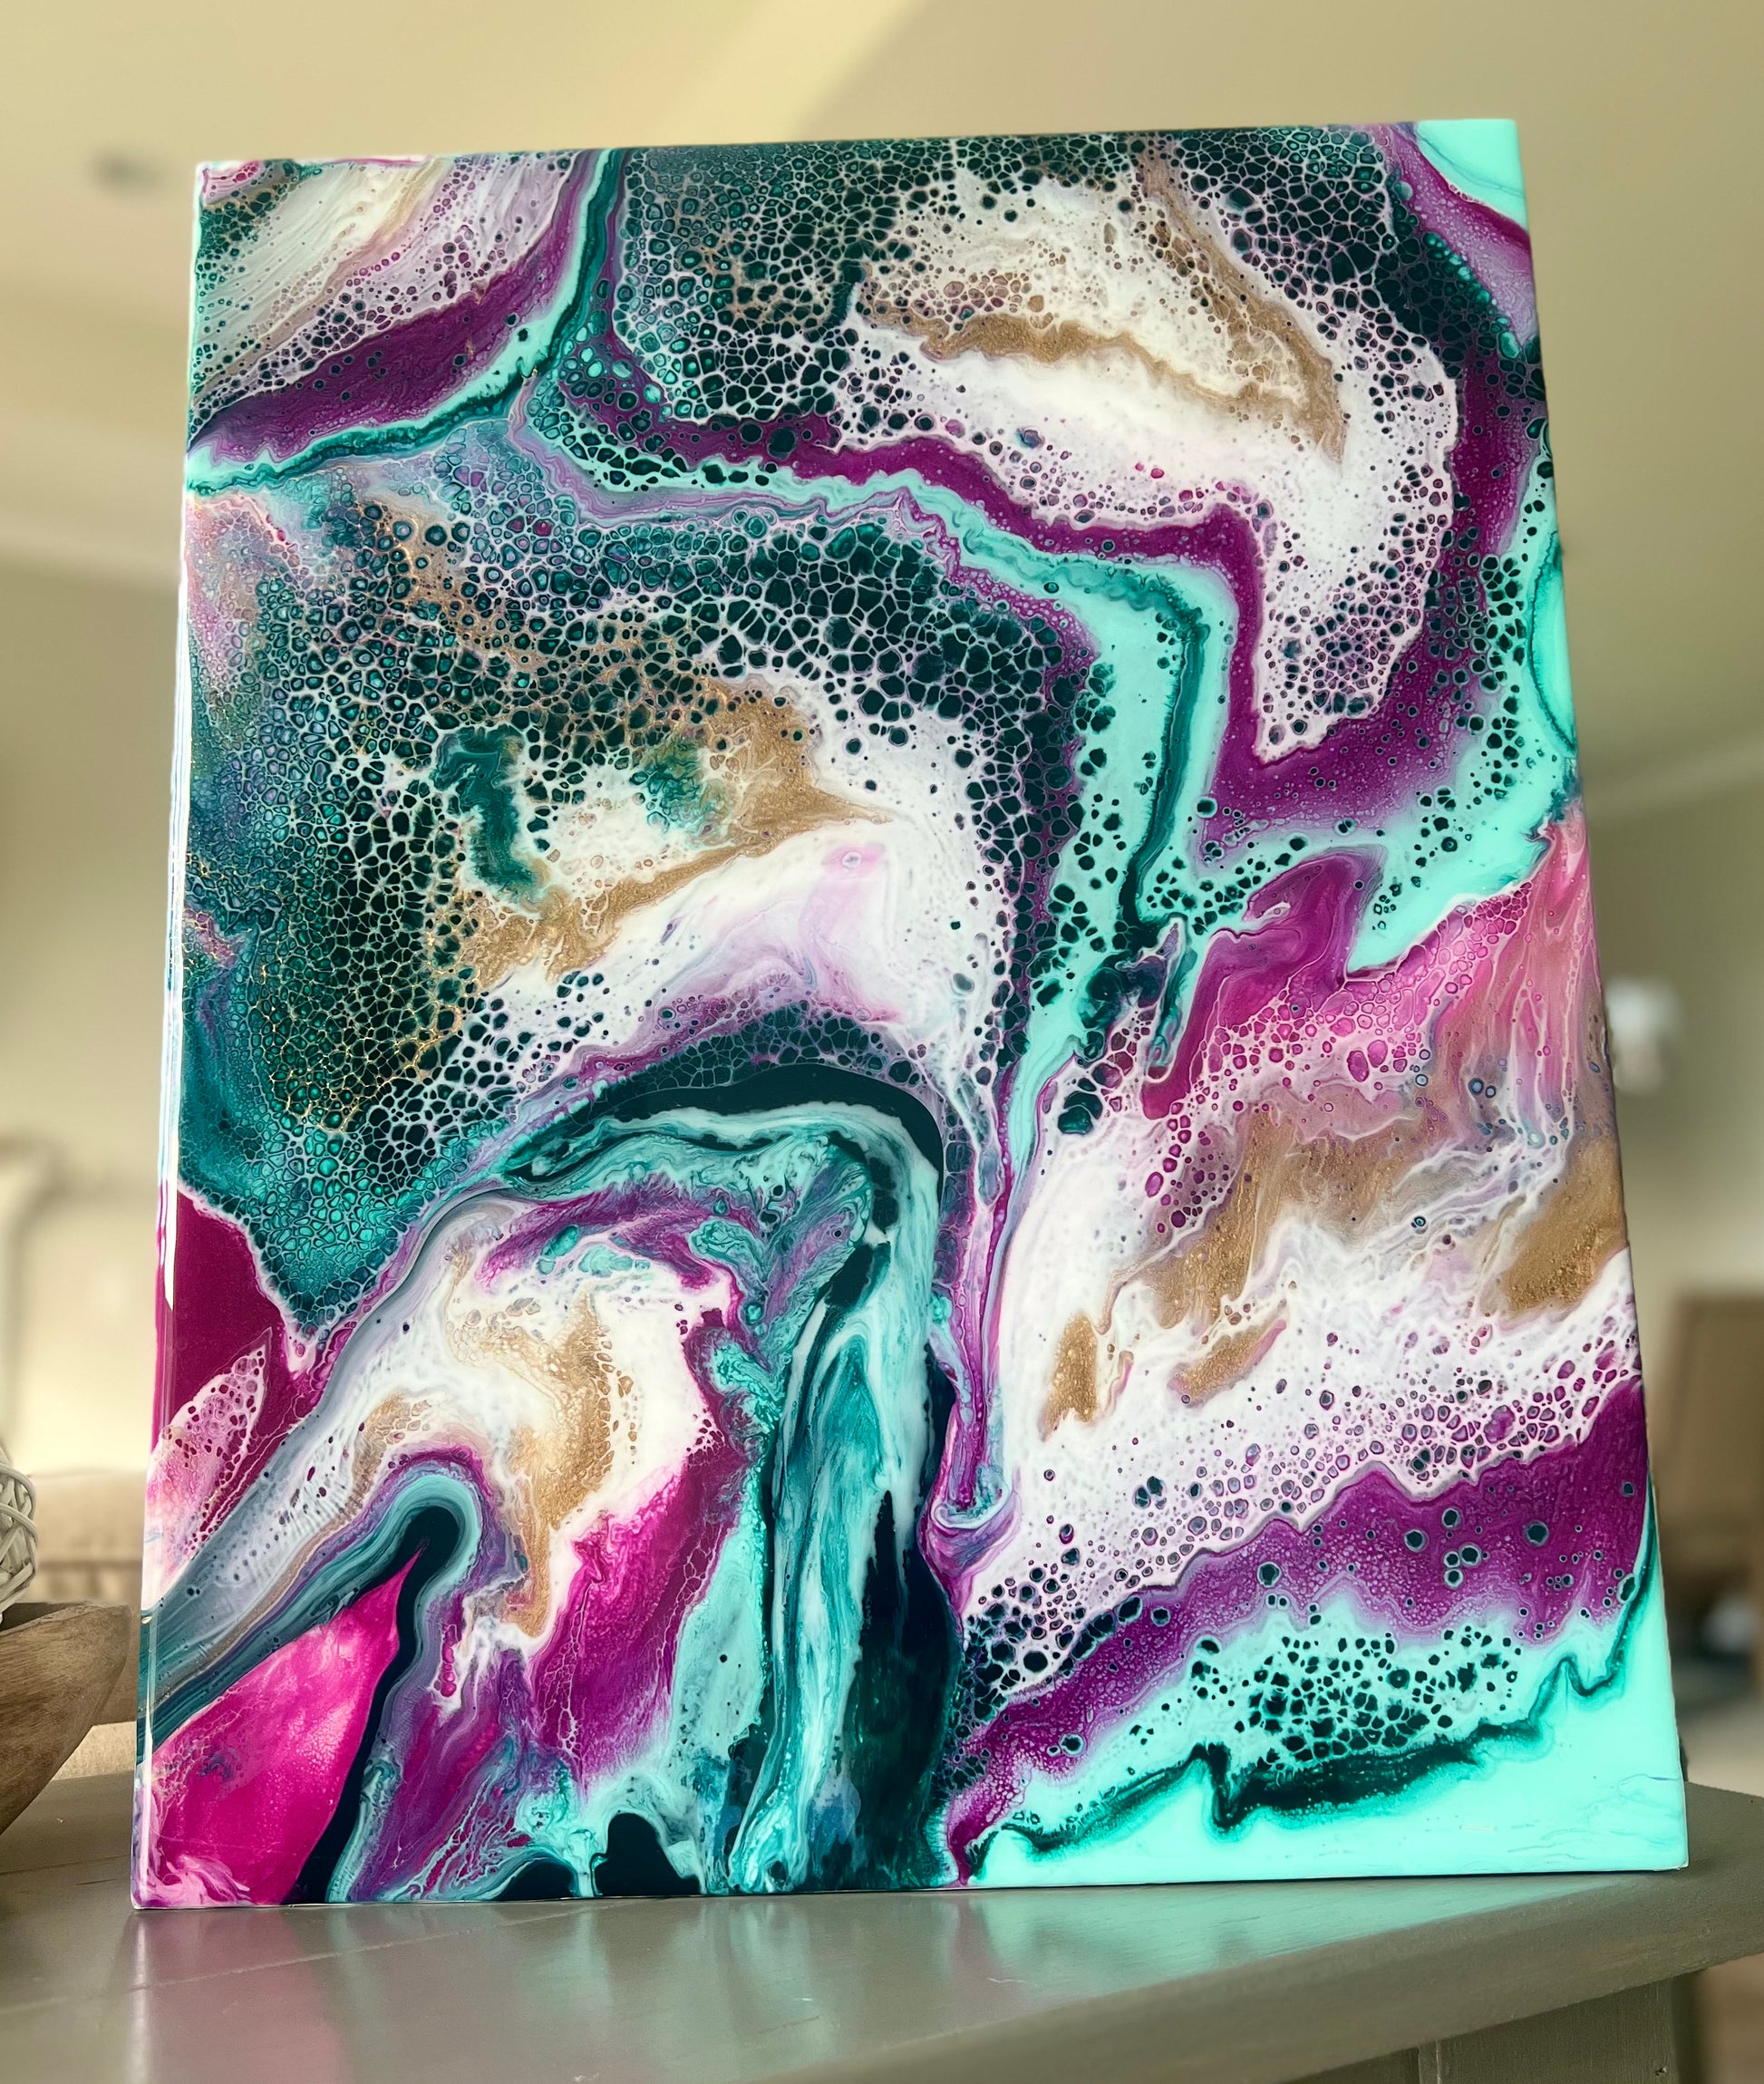 16" x 20" Dark Turqoise, Fuchsia, Light Teal, and Gold Resin Puddle Pour Painting